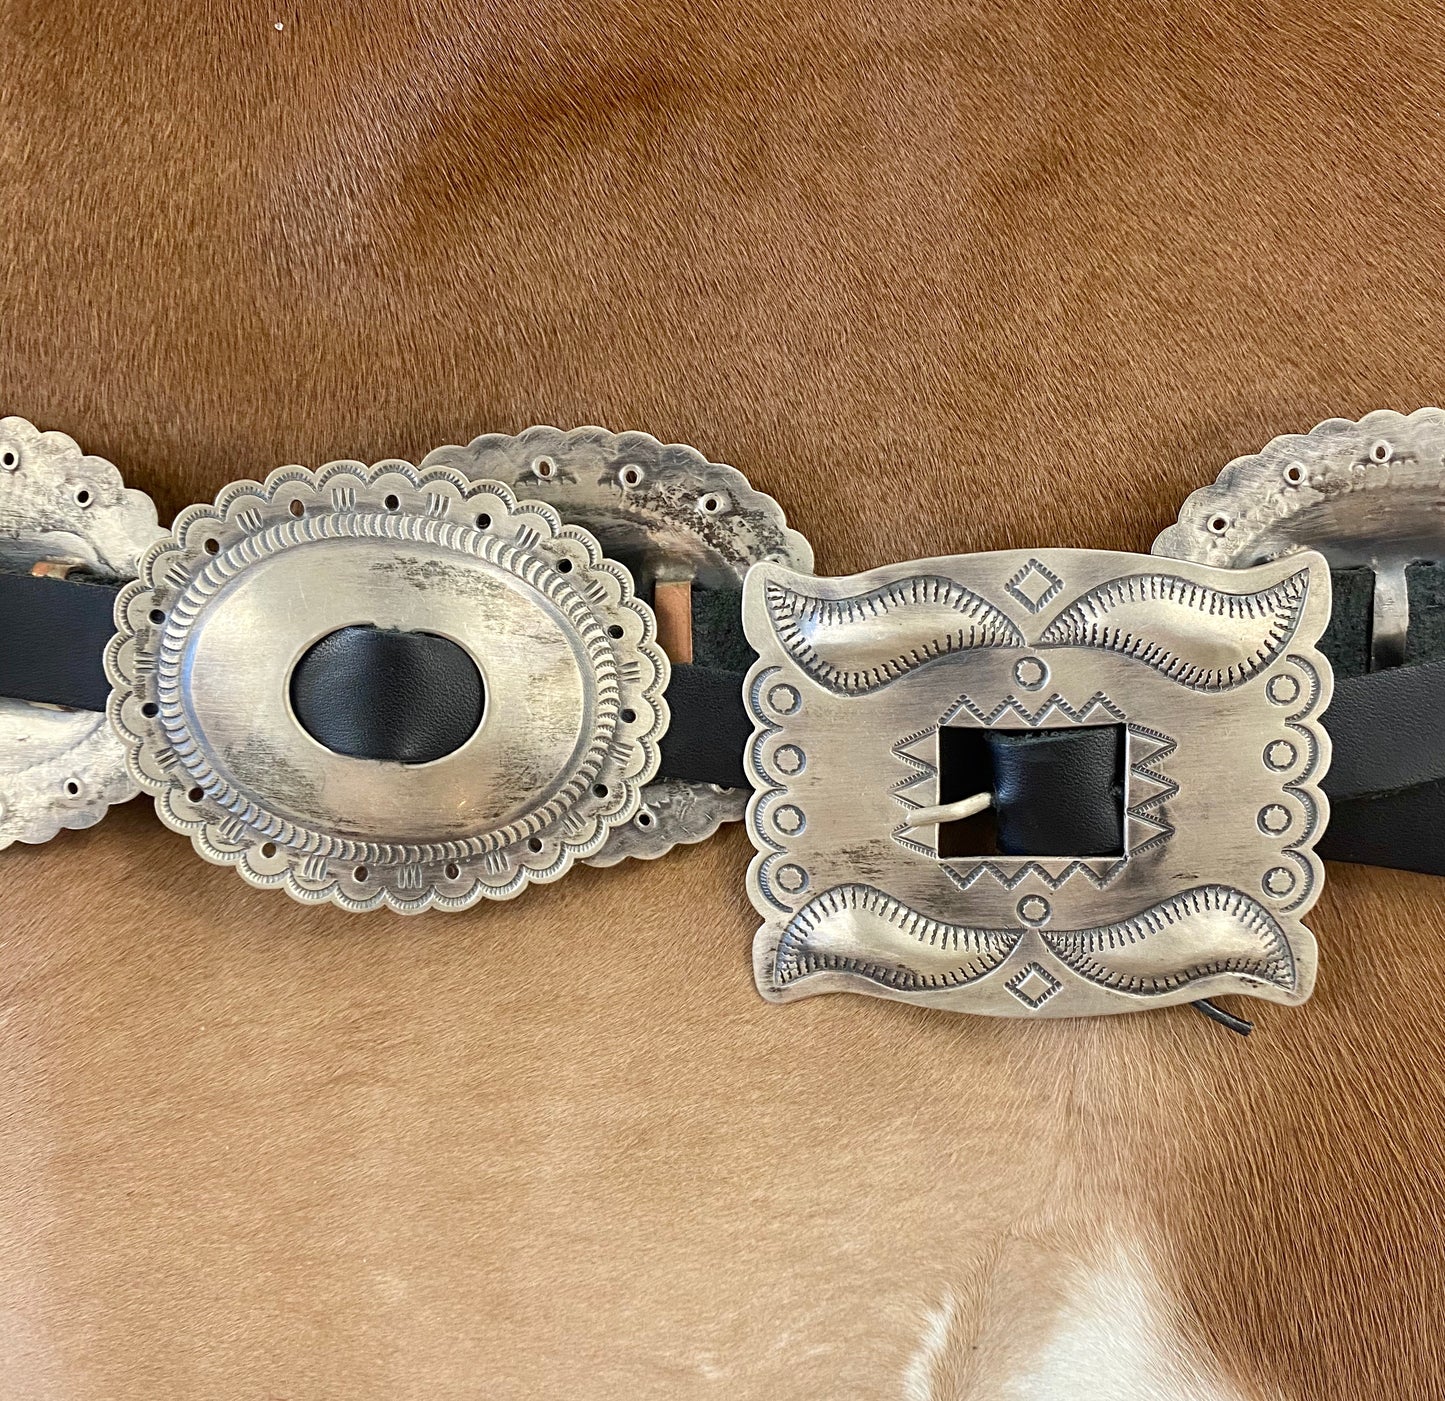 The Sterling Concho Belt - Ny Texas Style Boutique 44” inches from buckle to end of black leather silver Native American made Concho sterling silver signed large concho belt. Signed "RS" on the back of the buckle piece by native artist silversmith Roger Skeet. This beautiful handmade concho belt features 8 Conchos plus buckle piece. The perfect silver concho belt on black leather to add to your accessory wardrobe.   Hallmark/Artist: Roger Skeet, Navajo